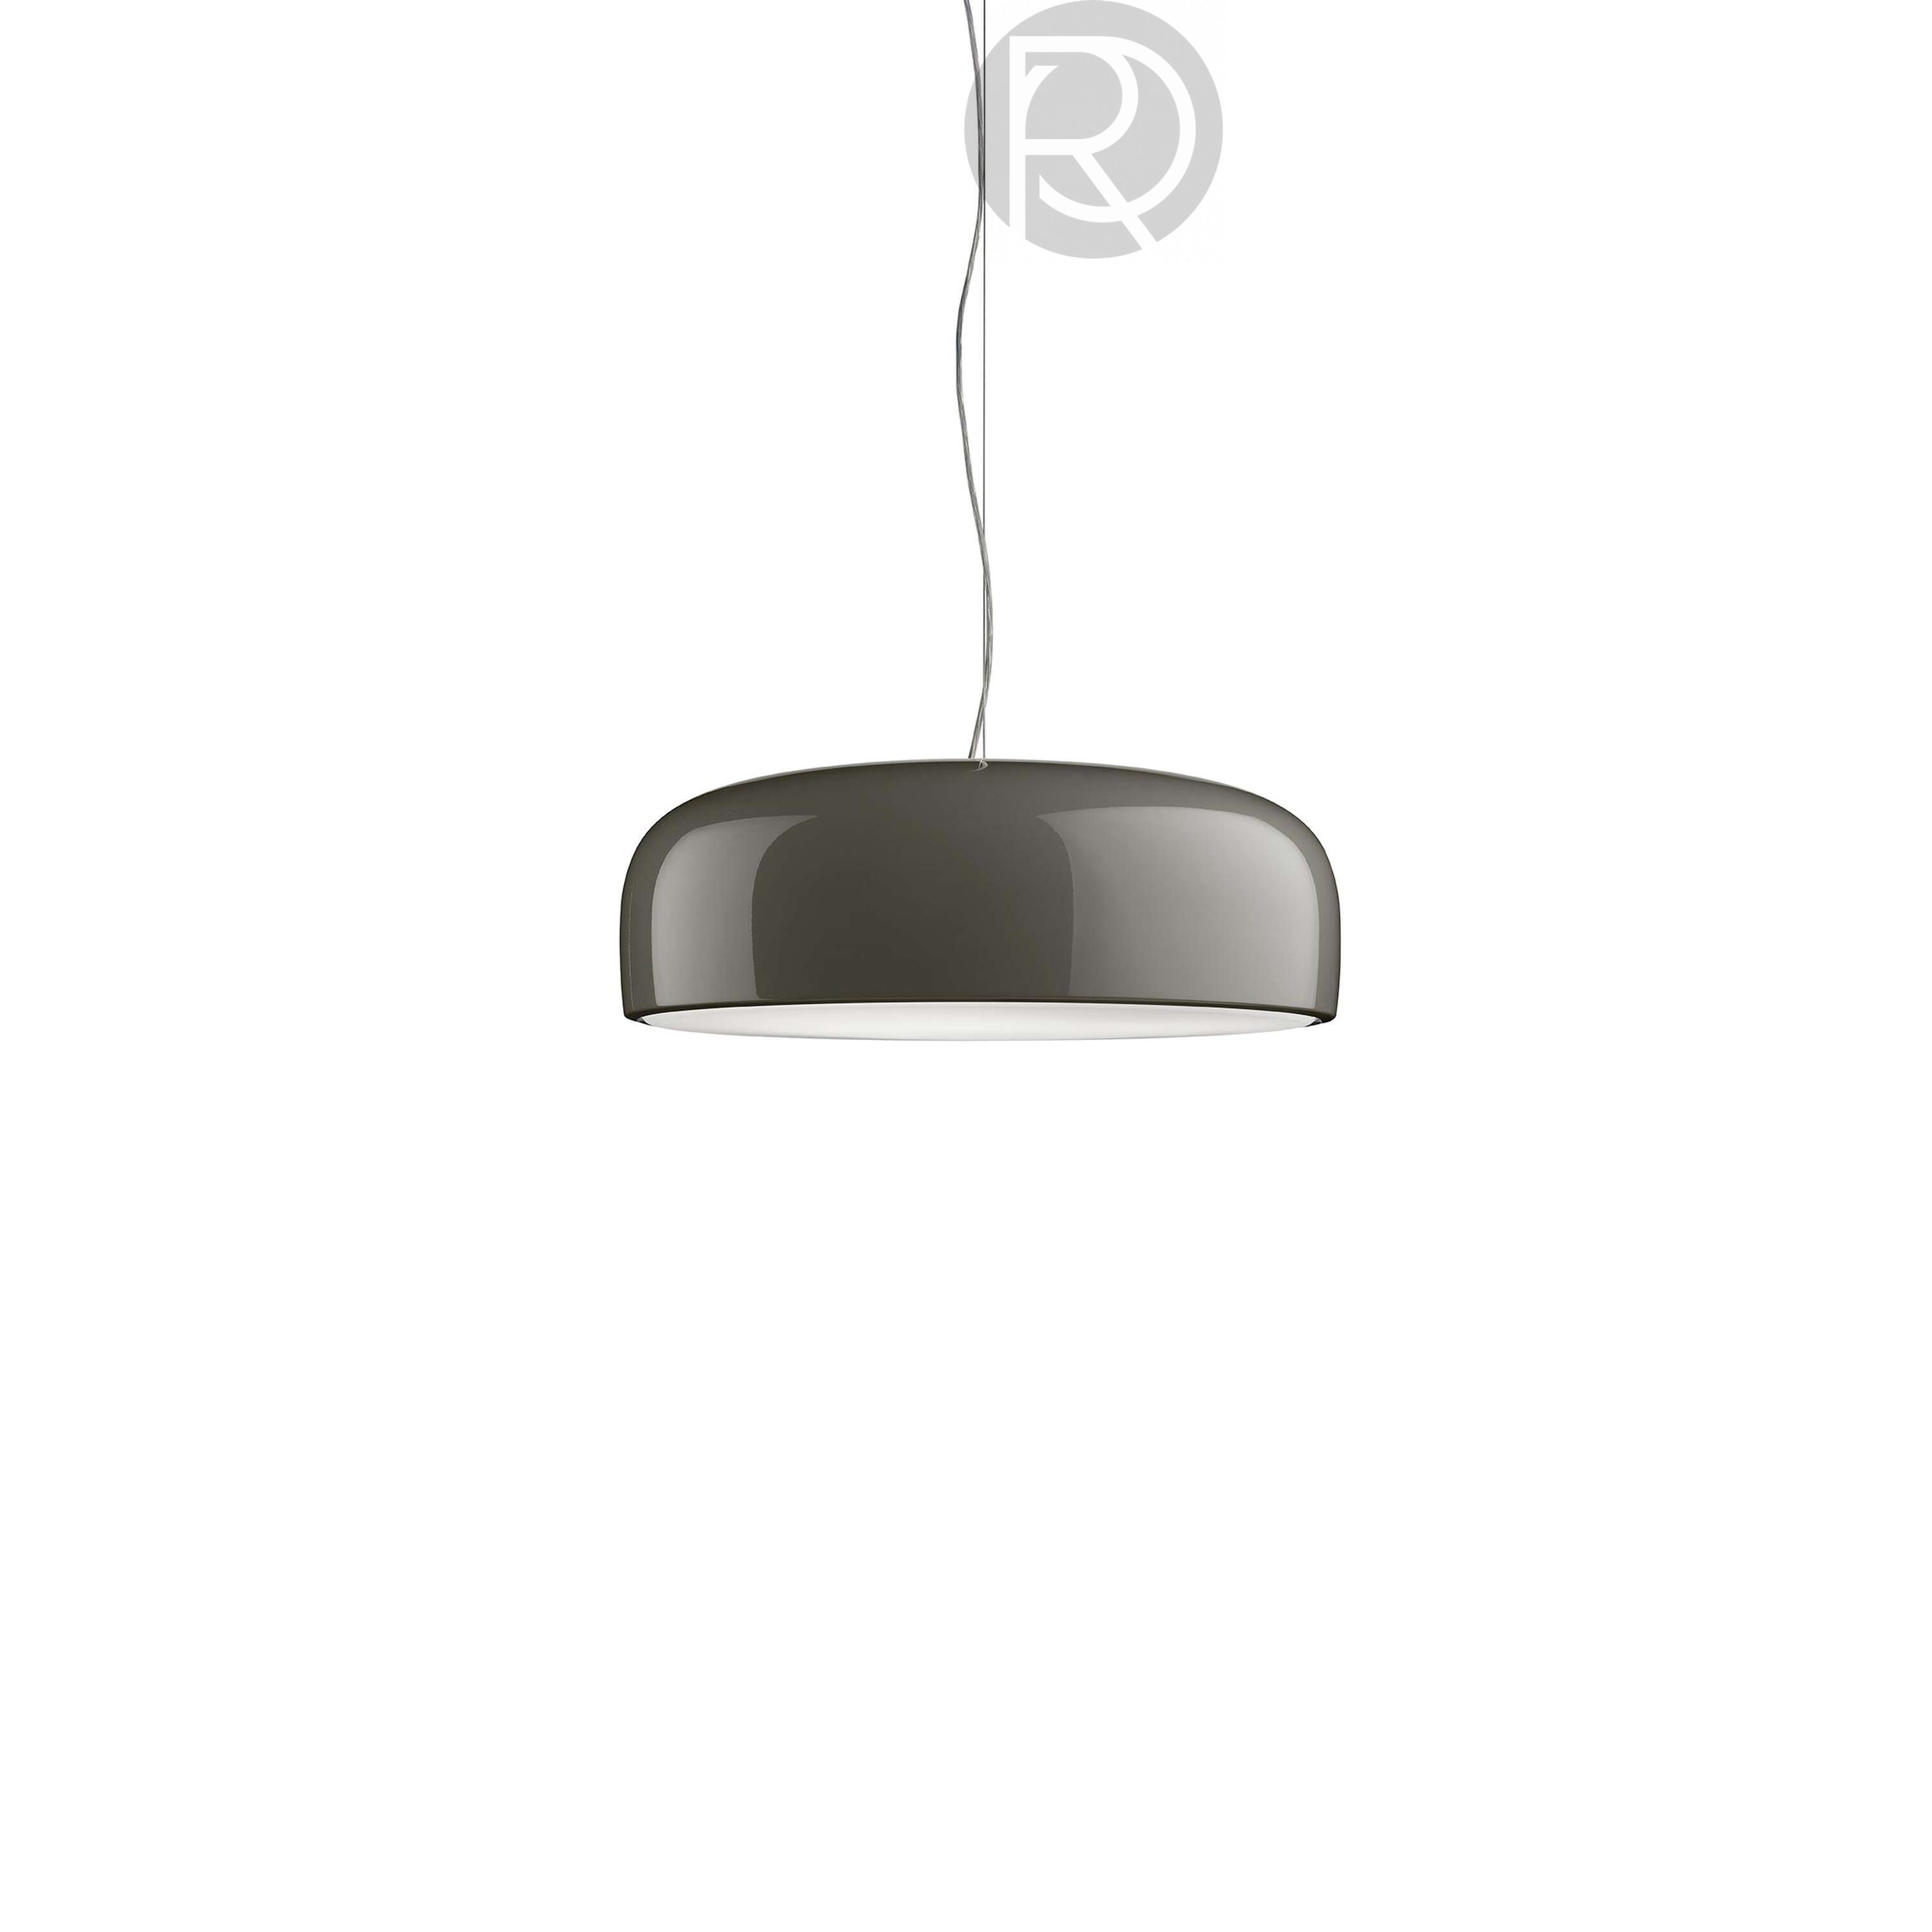 Hanging lamp SMITHFIELD PRO by Flos